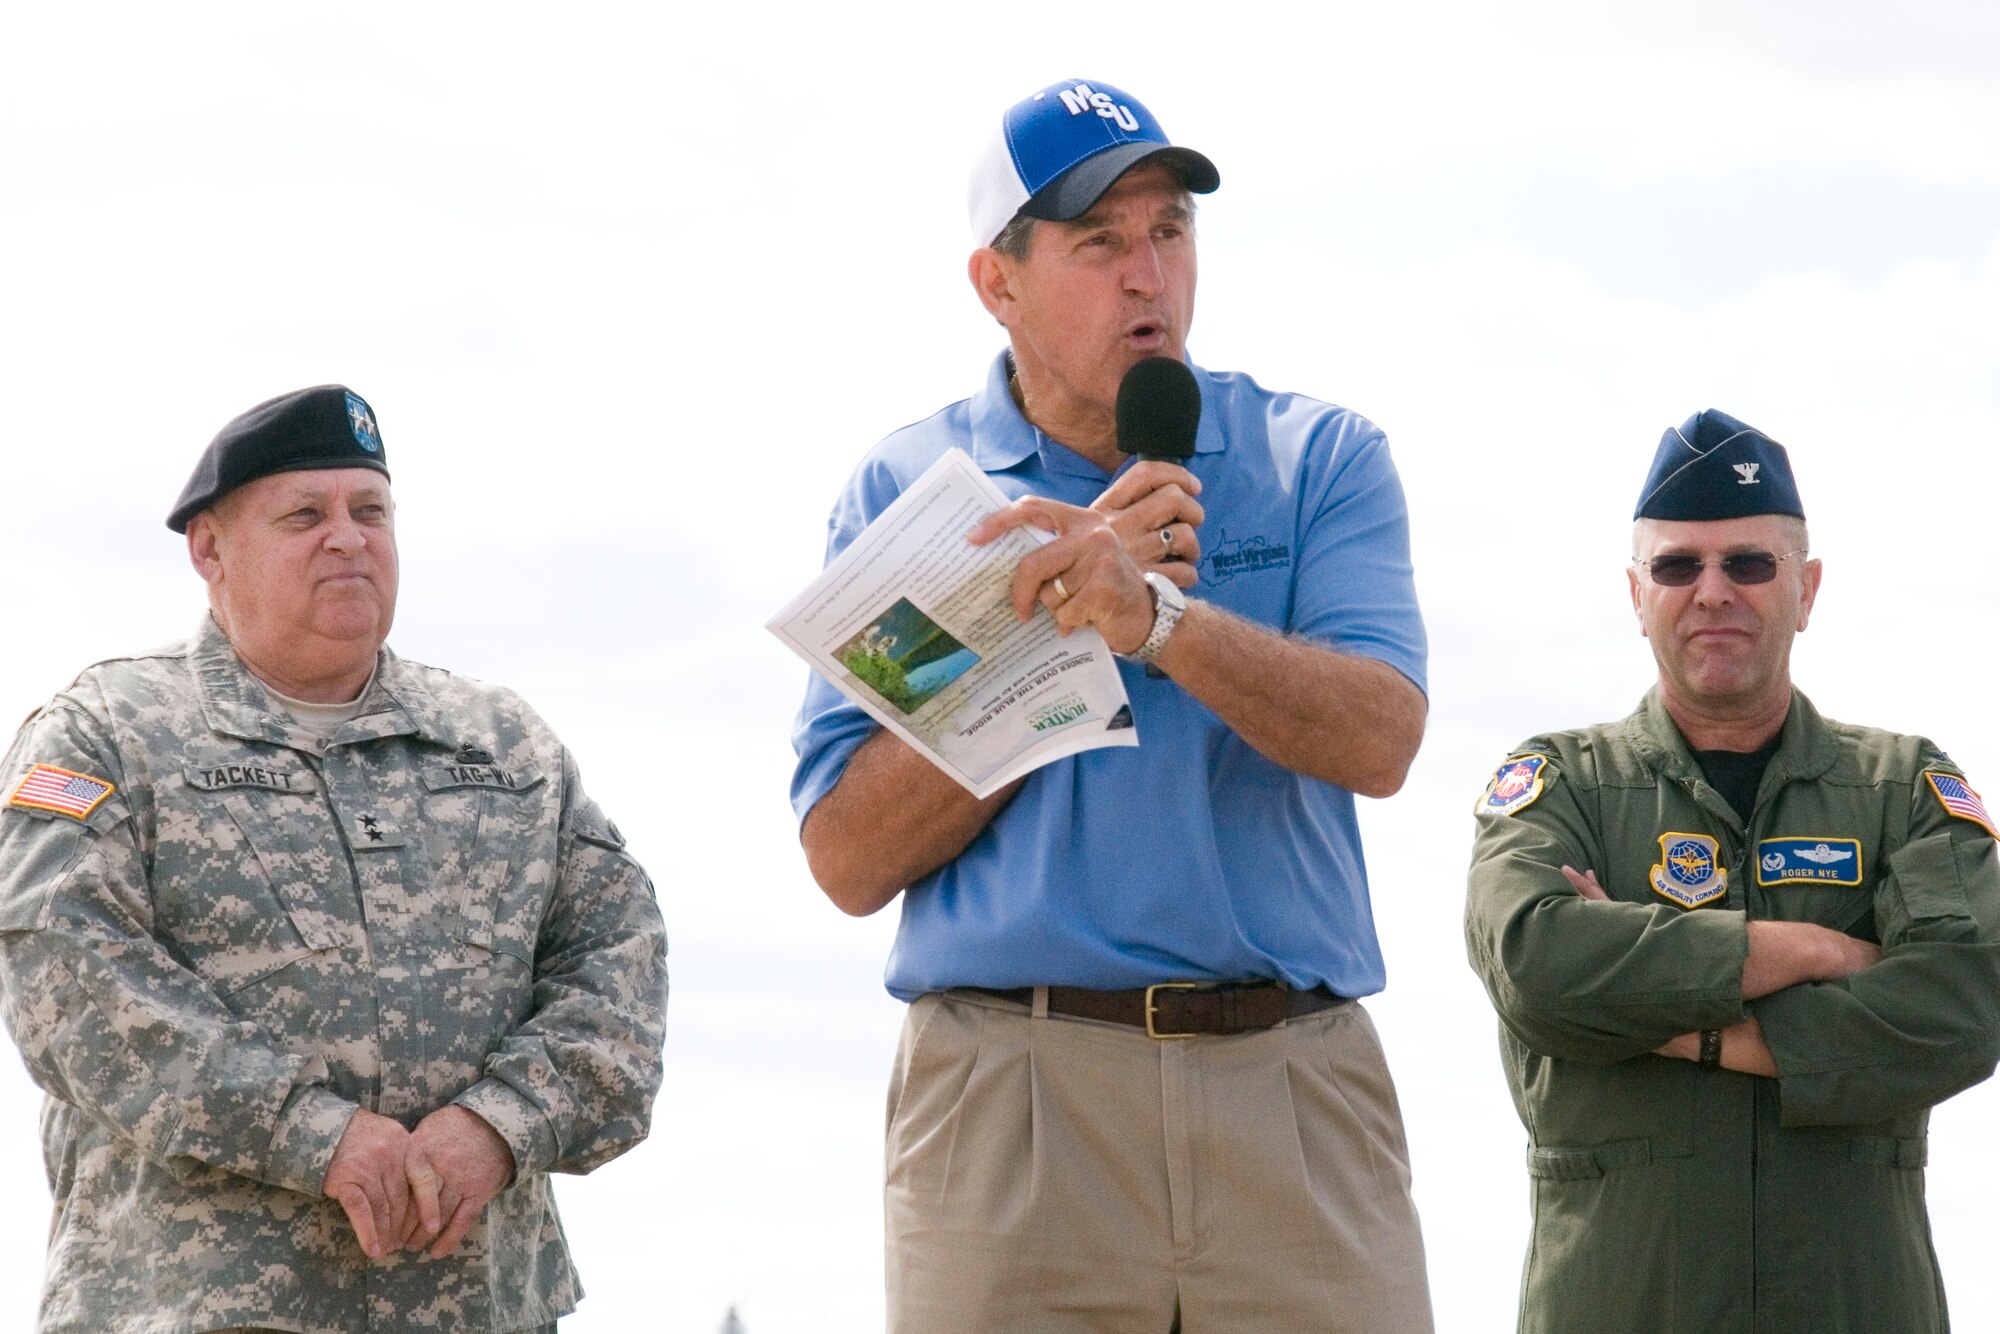 West Virginia Adjutant General, Major General Alan Tackett and 167th Airlift Wing commander, Colonel Roger Nye stand behind West Virginia Governor, Joe Manchin III, as he speaks during the opening ceremonies of the Thunder Over the Blue Ridge Open House and Air Show. The 167th Airlift Wing, West Virginia Air National Guard unit in Martinsburg, WV held an open house in conjuction with the Thunder Over the Blue Ridge Air Show on September 4 and 5, 2010. The U.S. Air Force Thunderbirds and the U.S. Army Golden Knights headlined the show. (U.S. Air Force photo by MSgt Emily Beightol-Deyerle)